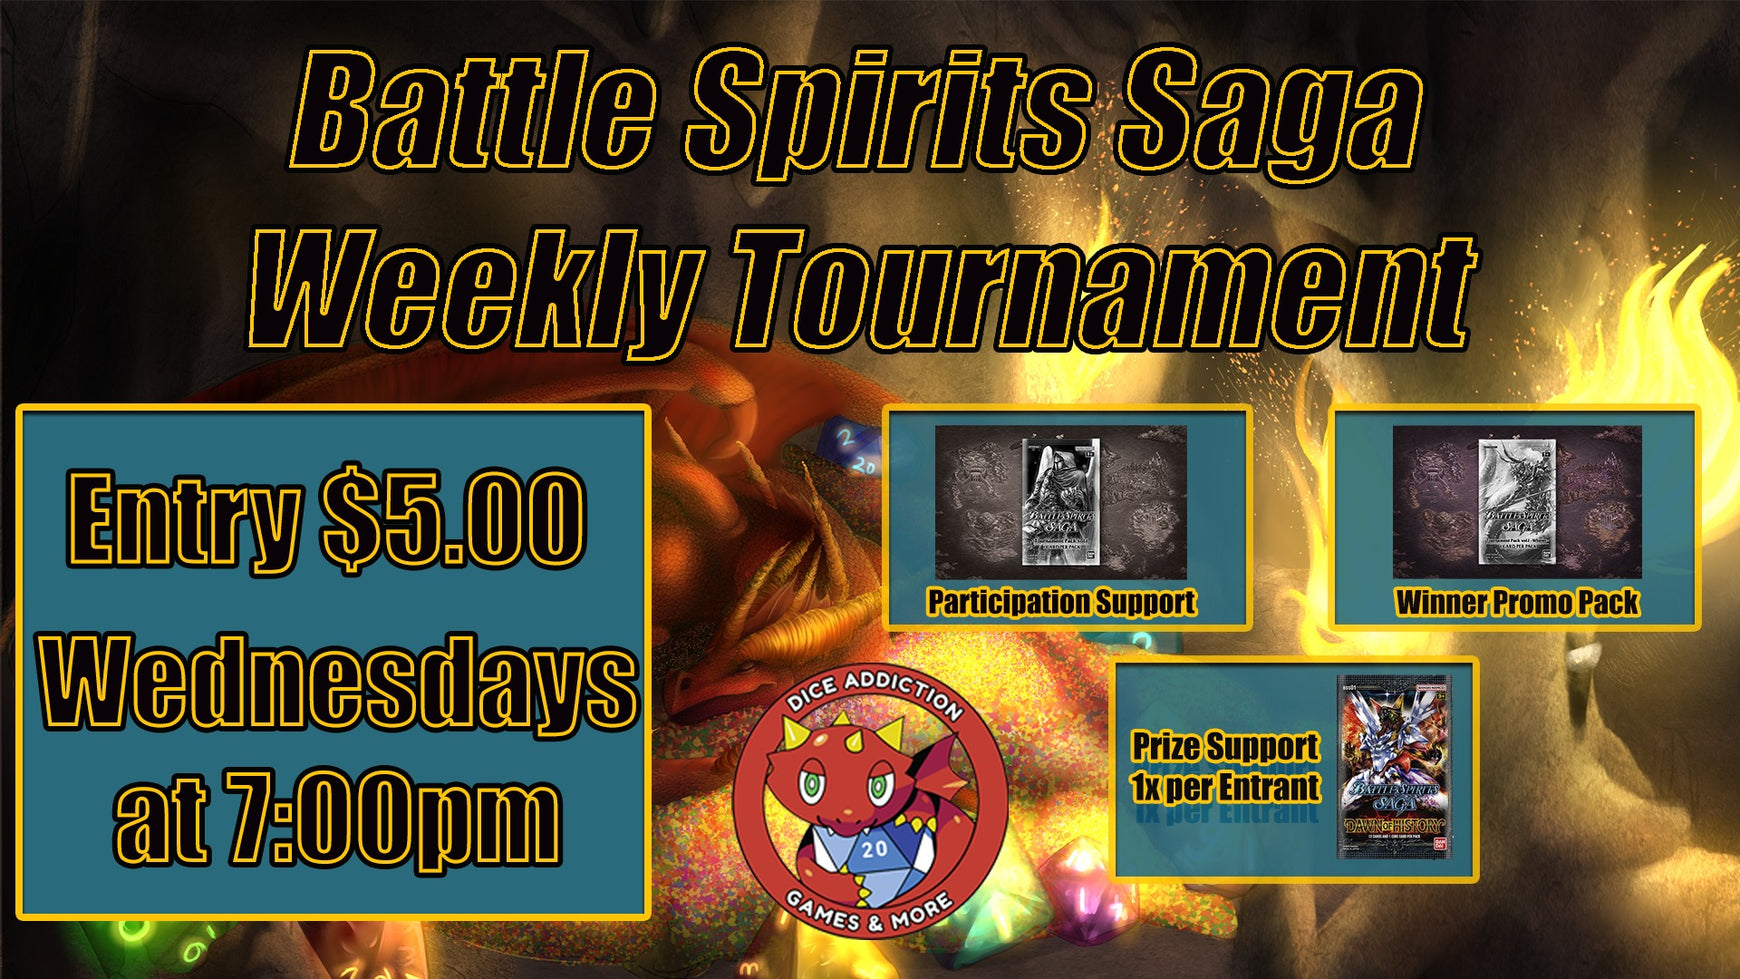 Weekly Wednesday Battle Spirits hosted by Dice Addiction